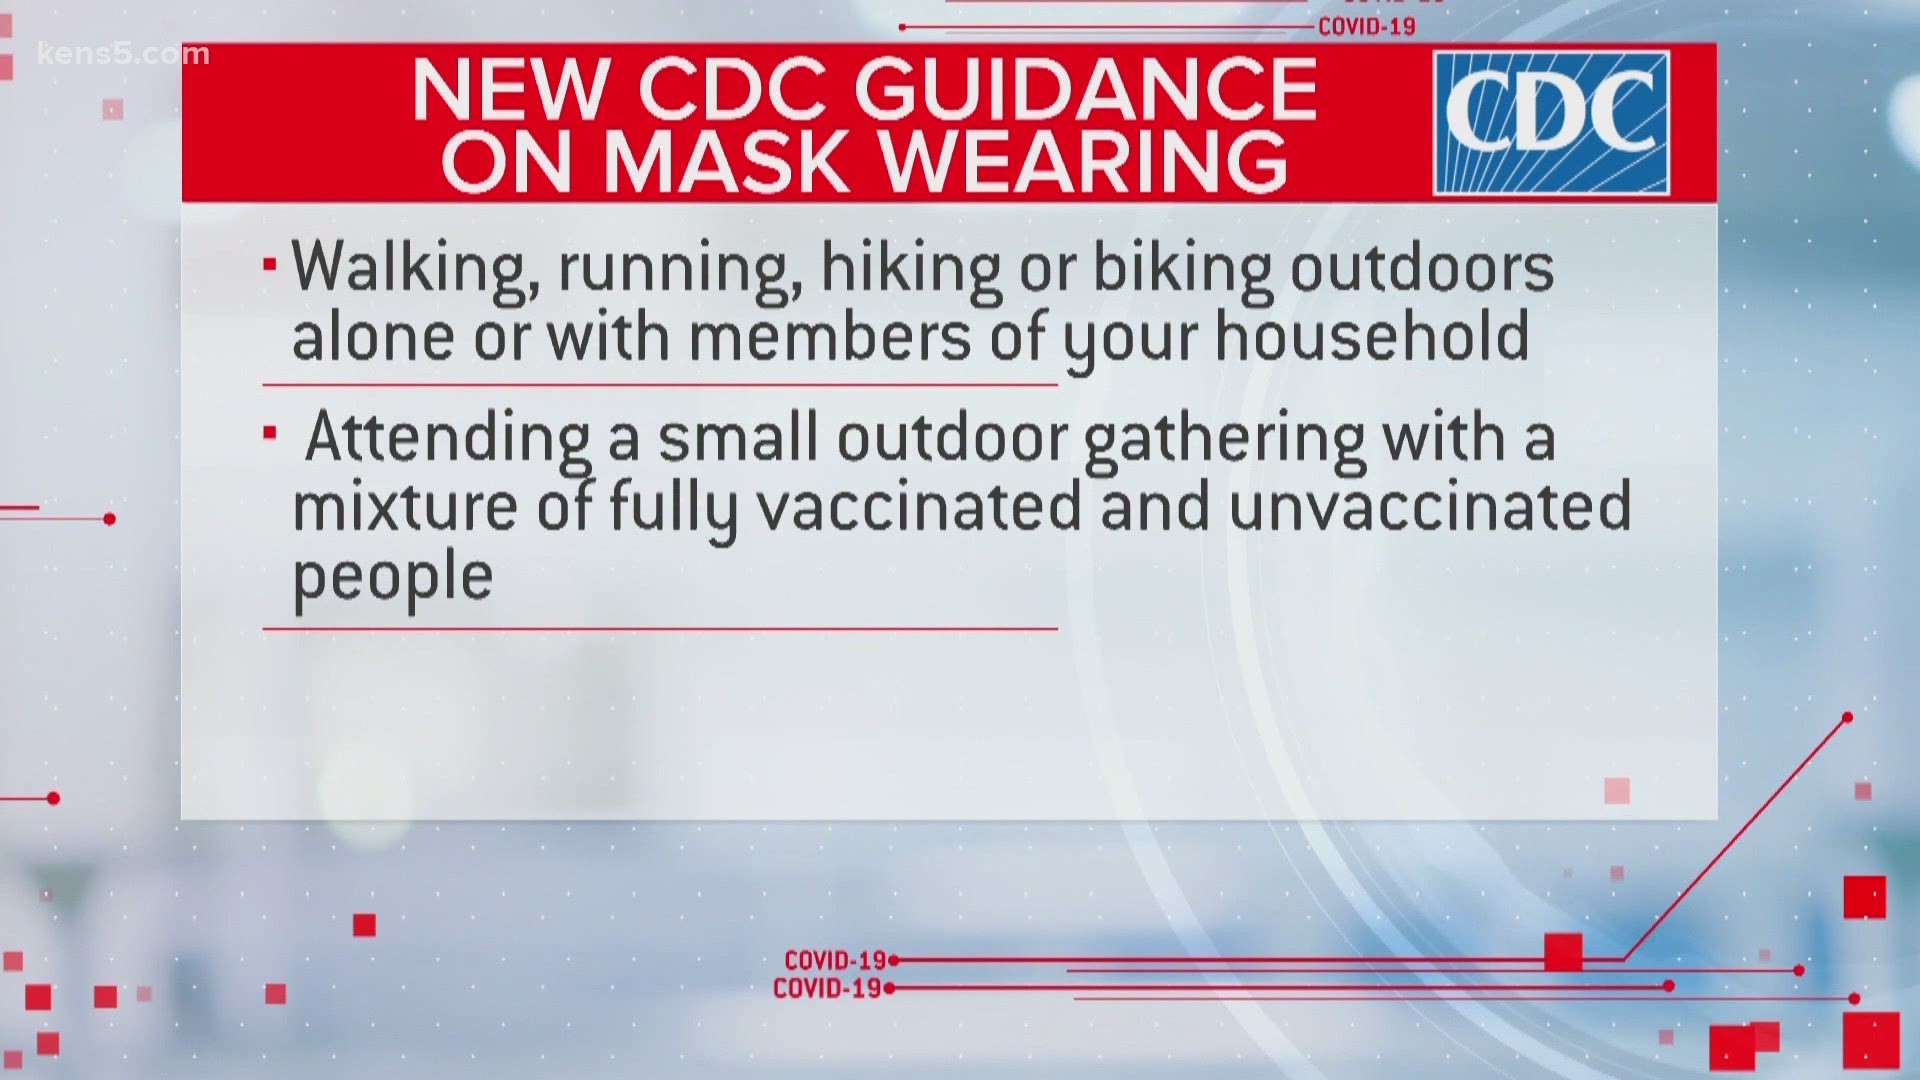 Health authorities say fully vaccinated Americans can now refrain from putting on a mask while exercising outdoors or participating in small gatherings.